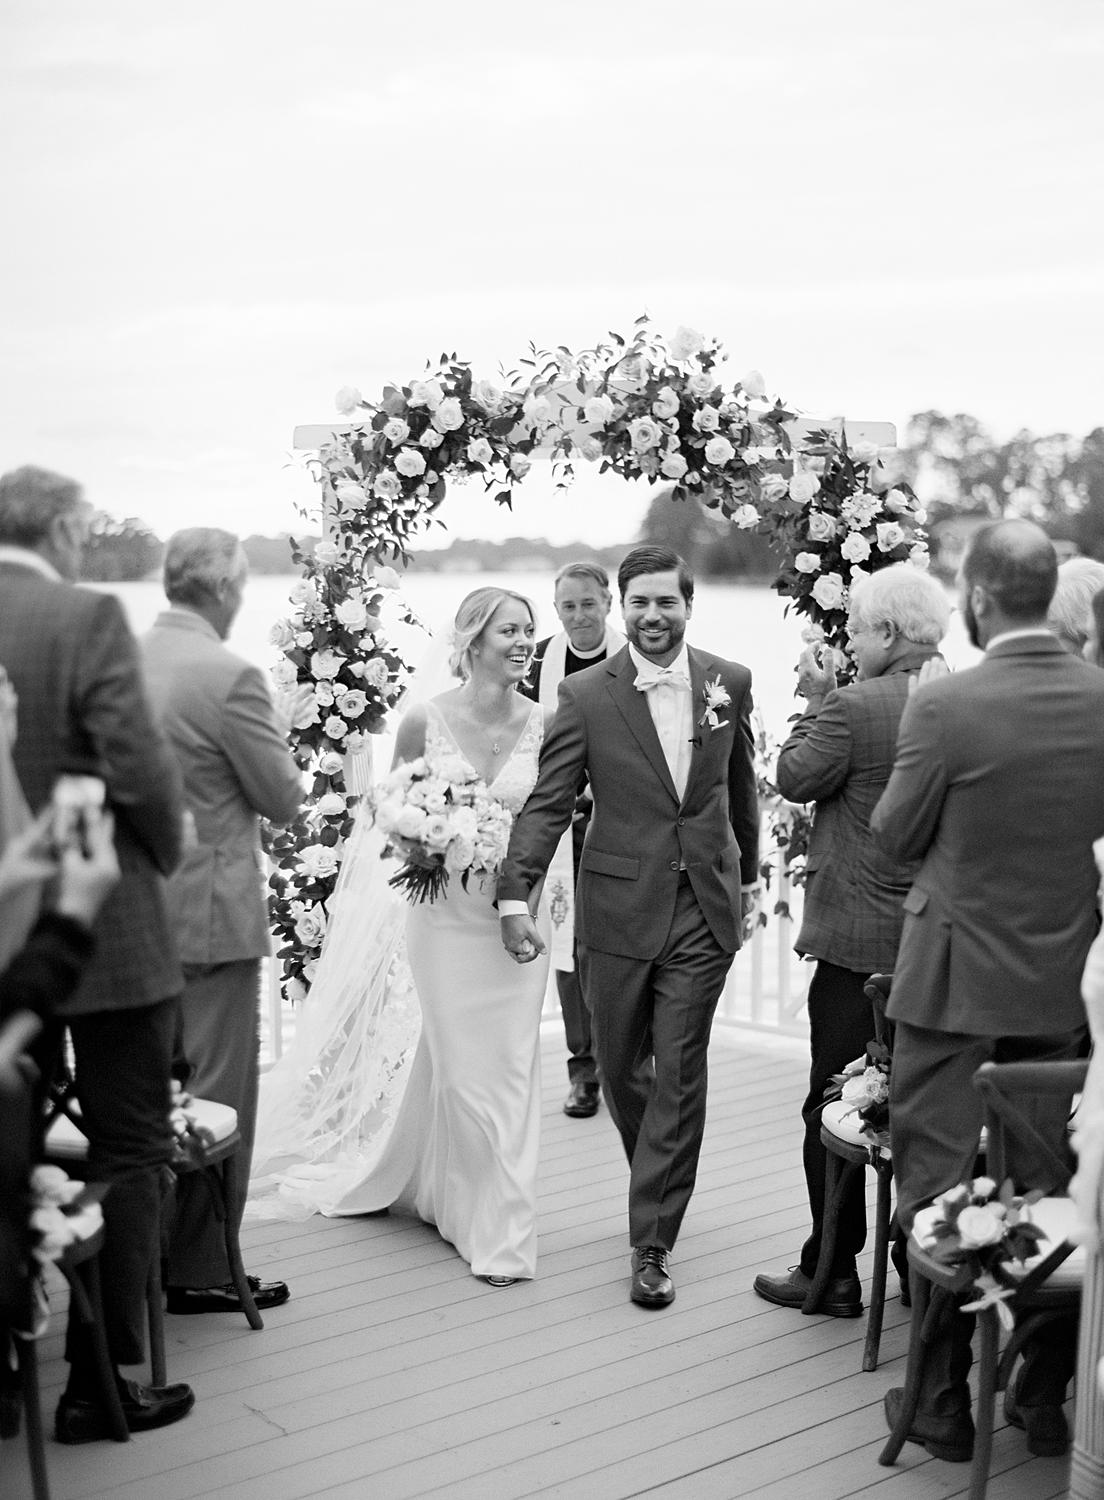 Bride and groom announced as husband and wife exiting their intimate home wedding